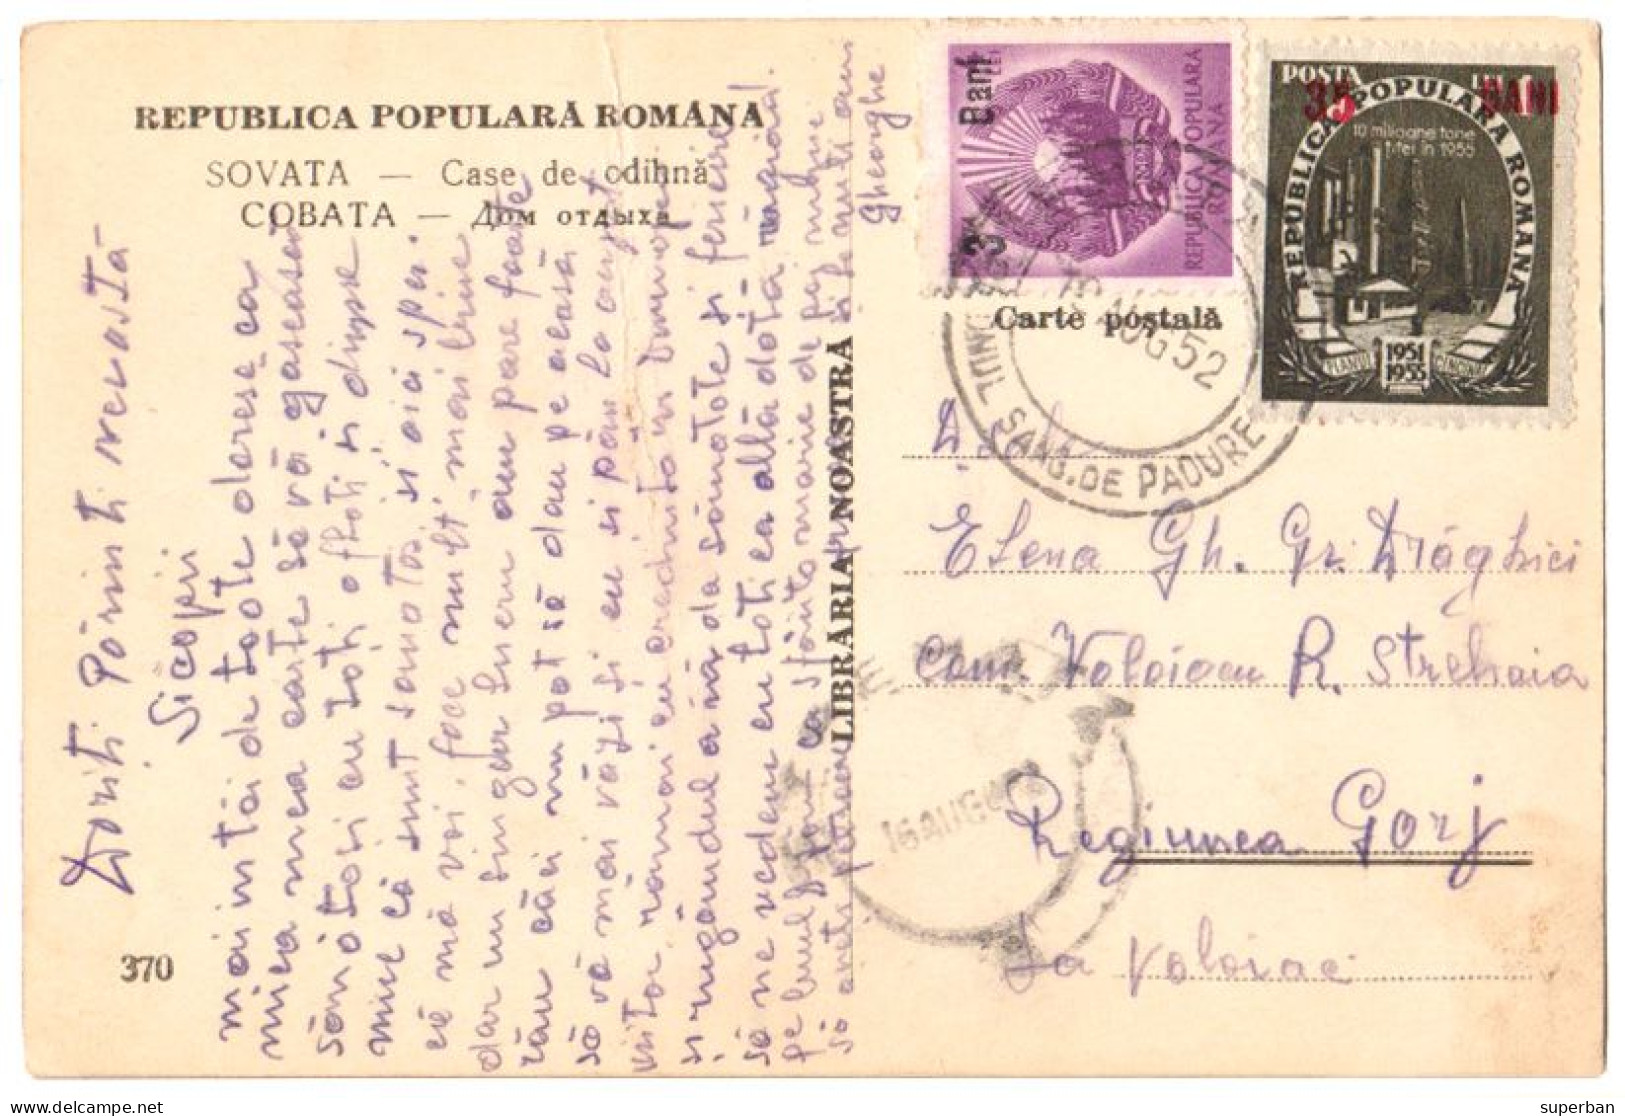 ROMANIA : 1952 - STABILIZAREA MONETARA / MONETARY STABILIZATION - POSTCARD MAILED With OVERPRINTED STAMPS - RRR (am195) - Covers & Documents